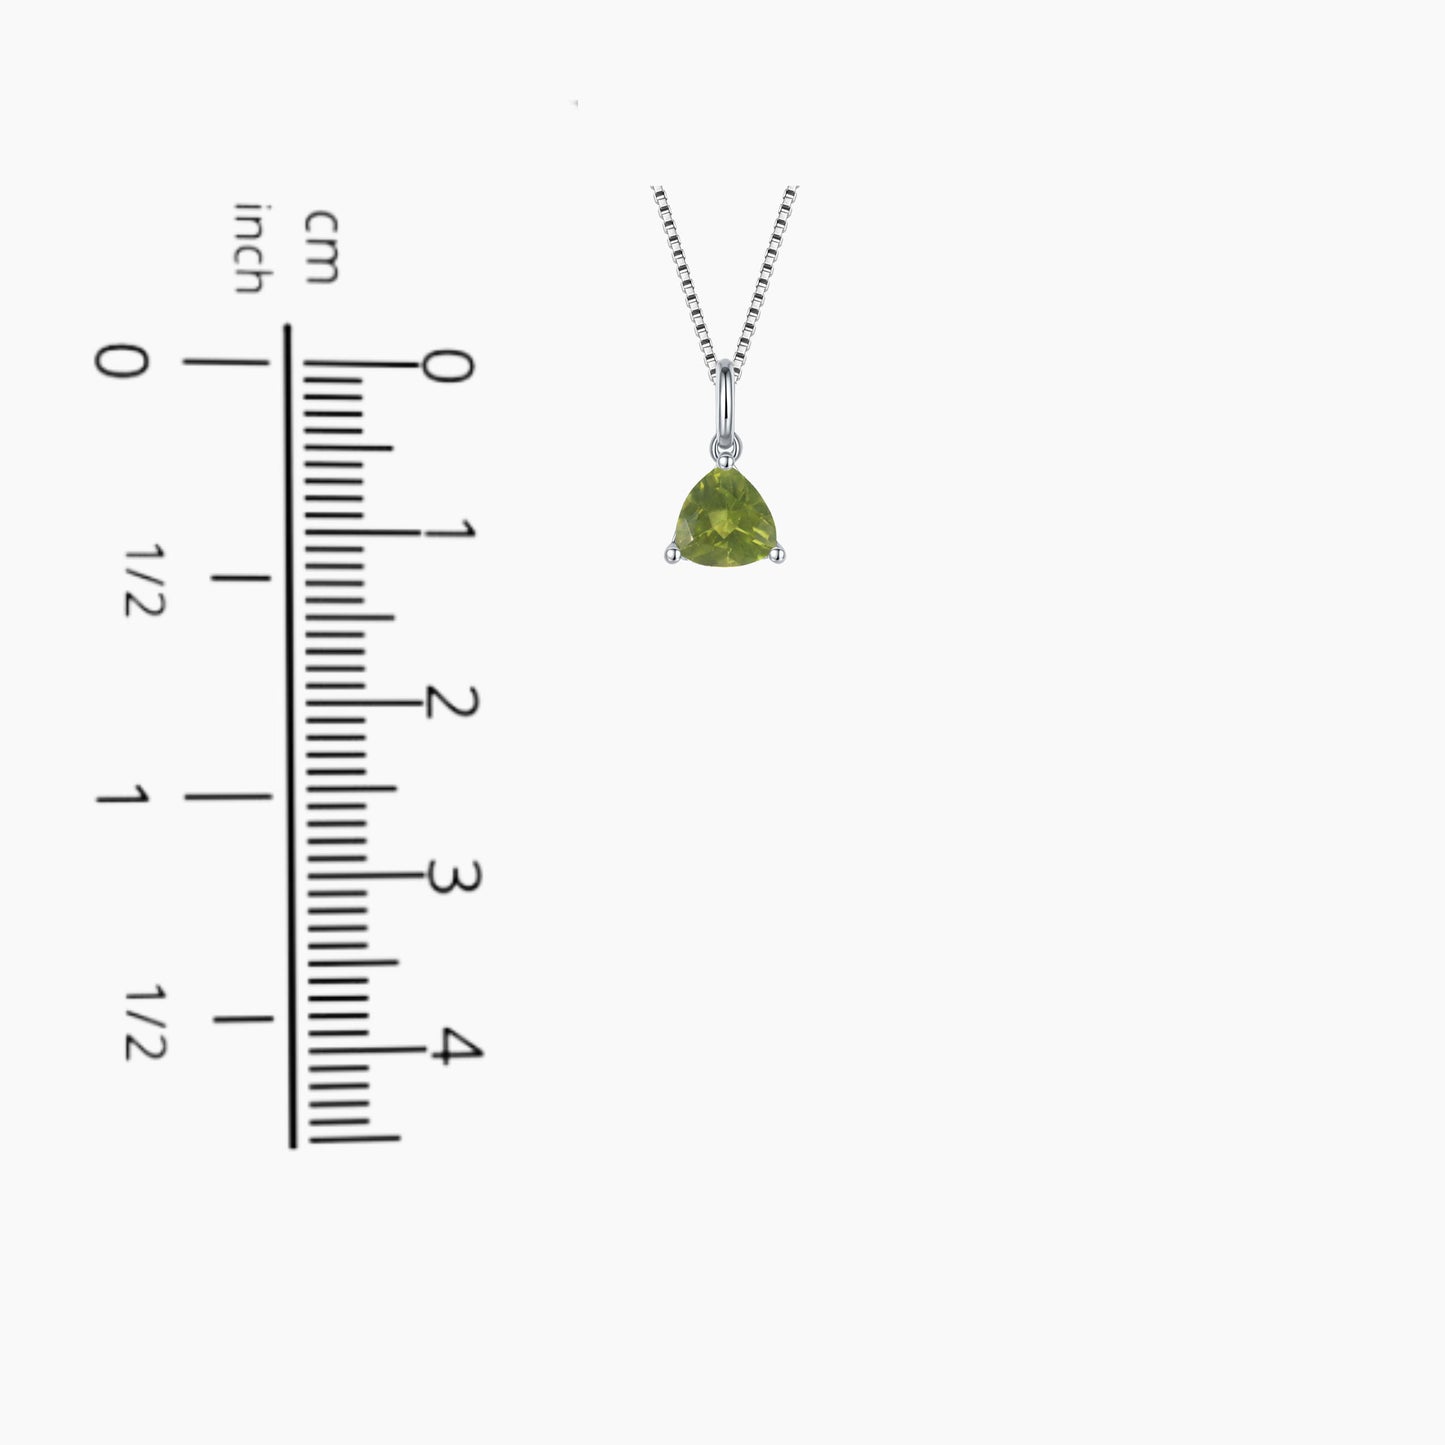 Irosk Tri Necklace in Sterling Silver -  Peridot